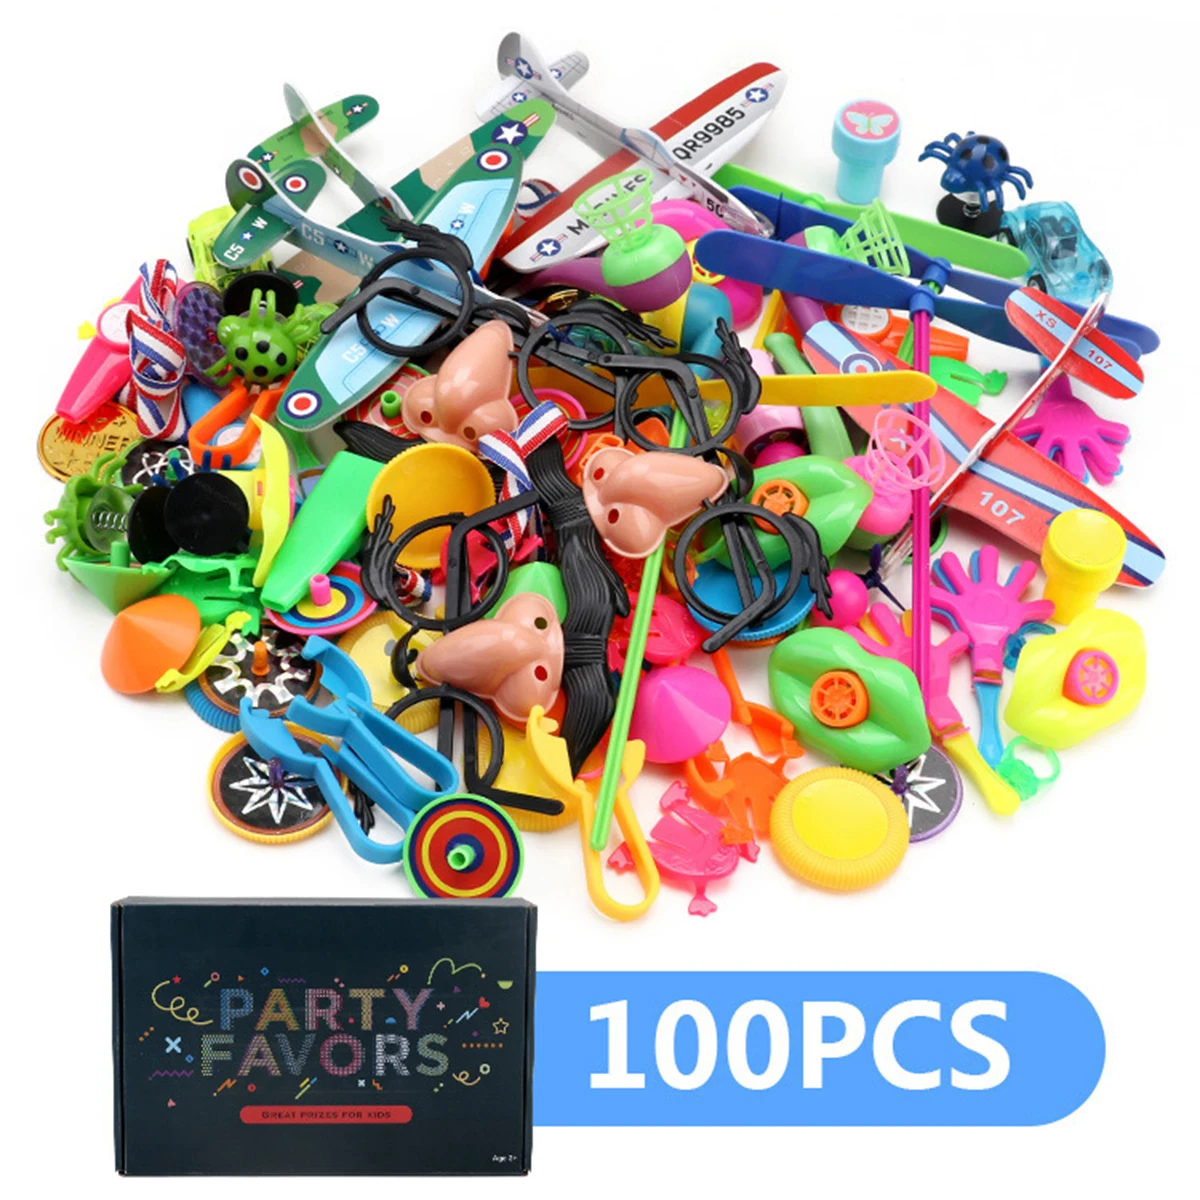 

100PCS Party Toys Assortment Party Favors for Kids Birthday Party Favor Carnival Prizes Box Goodie Bag Fillers Classroom Rewards